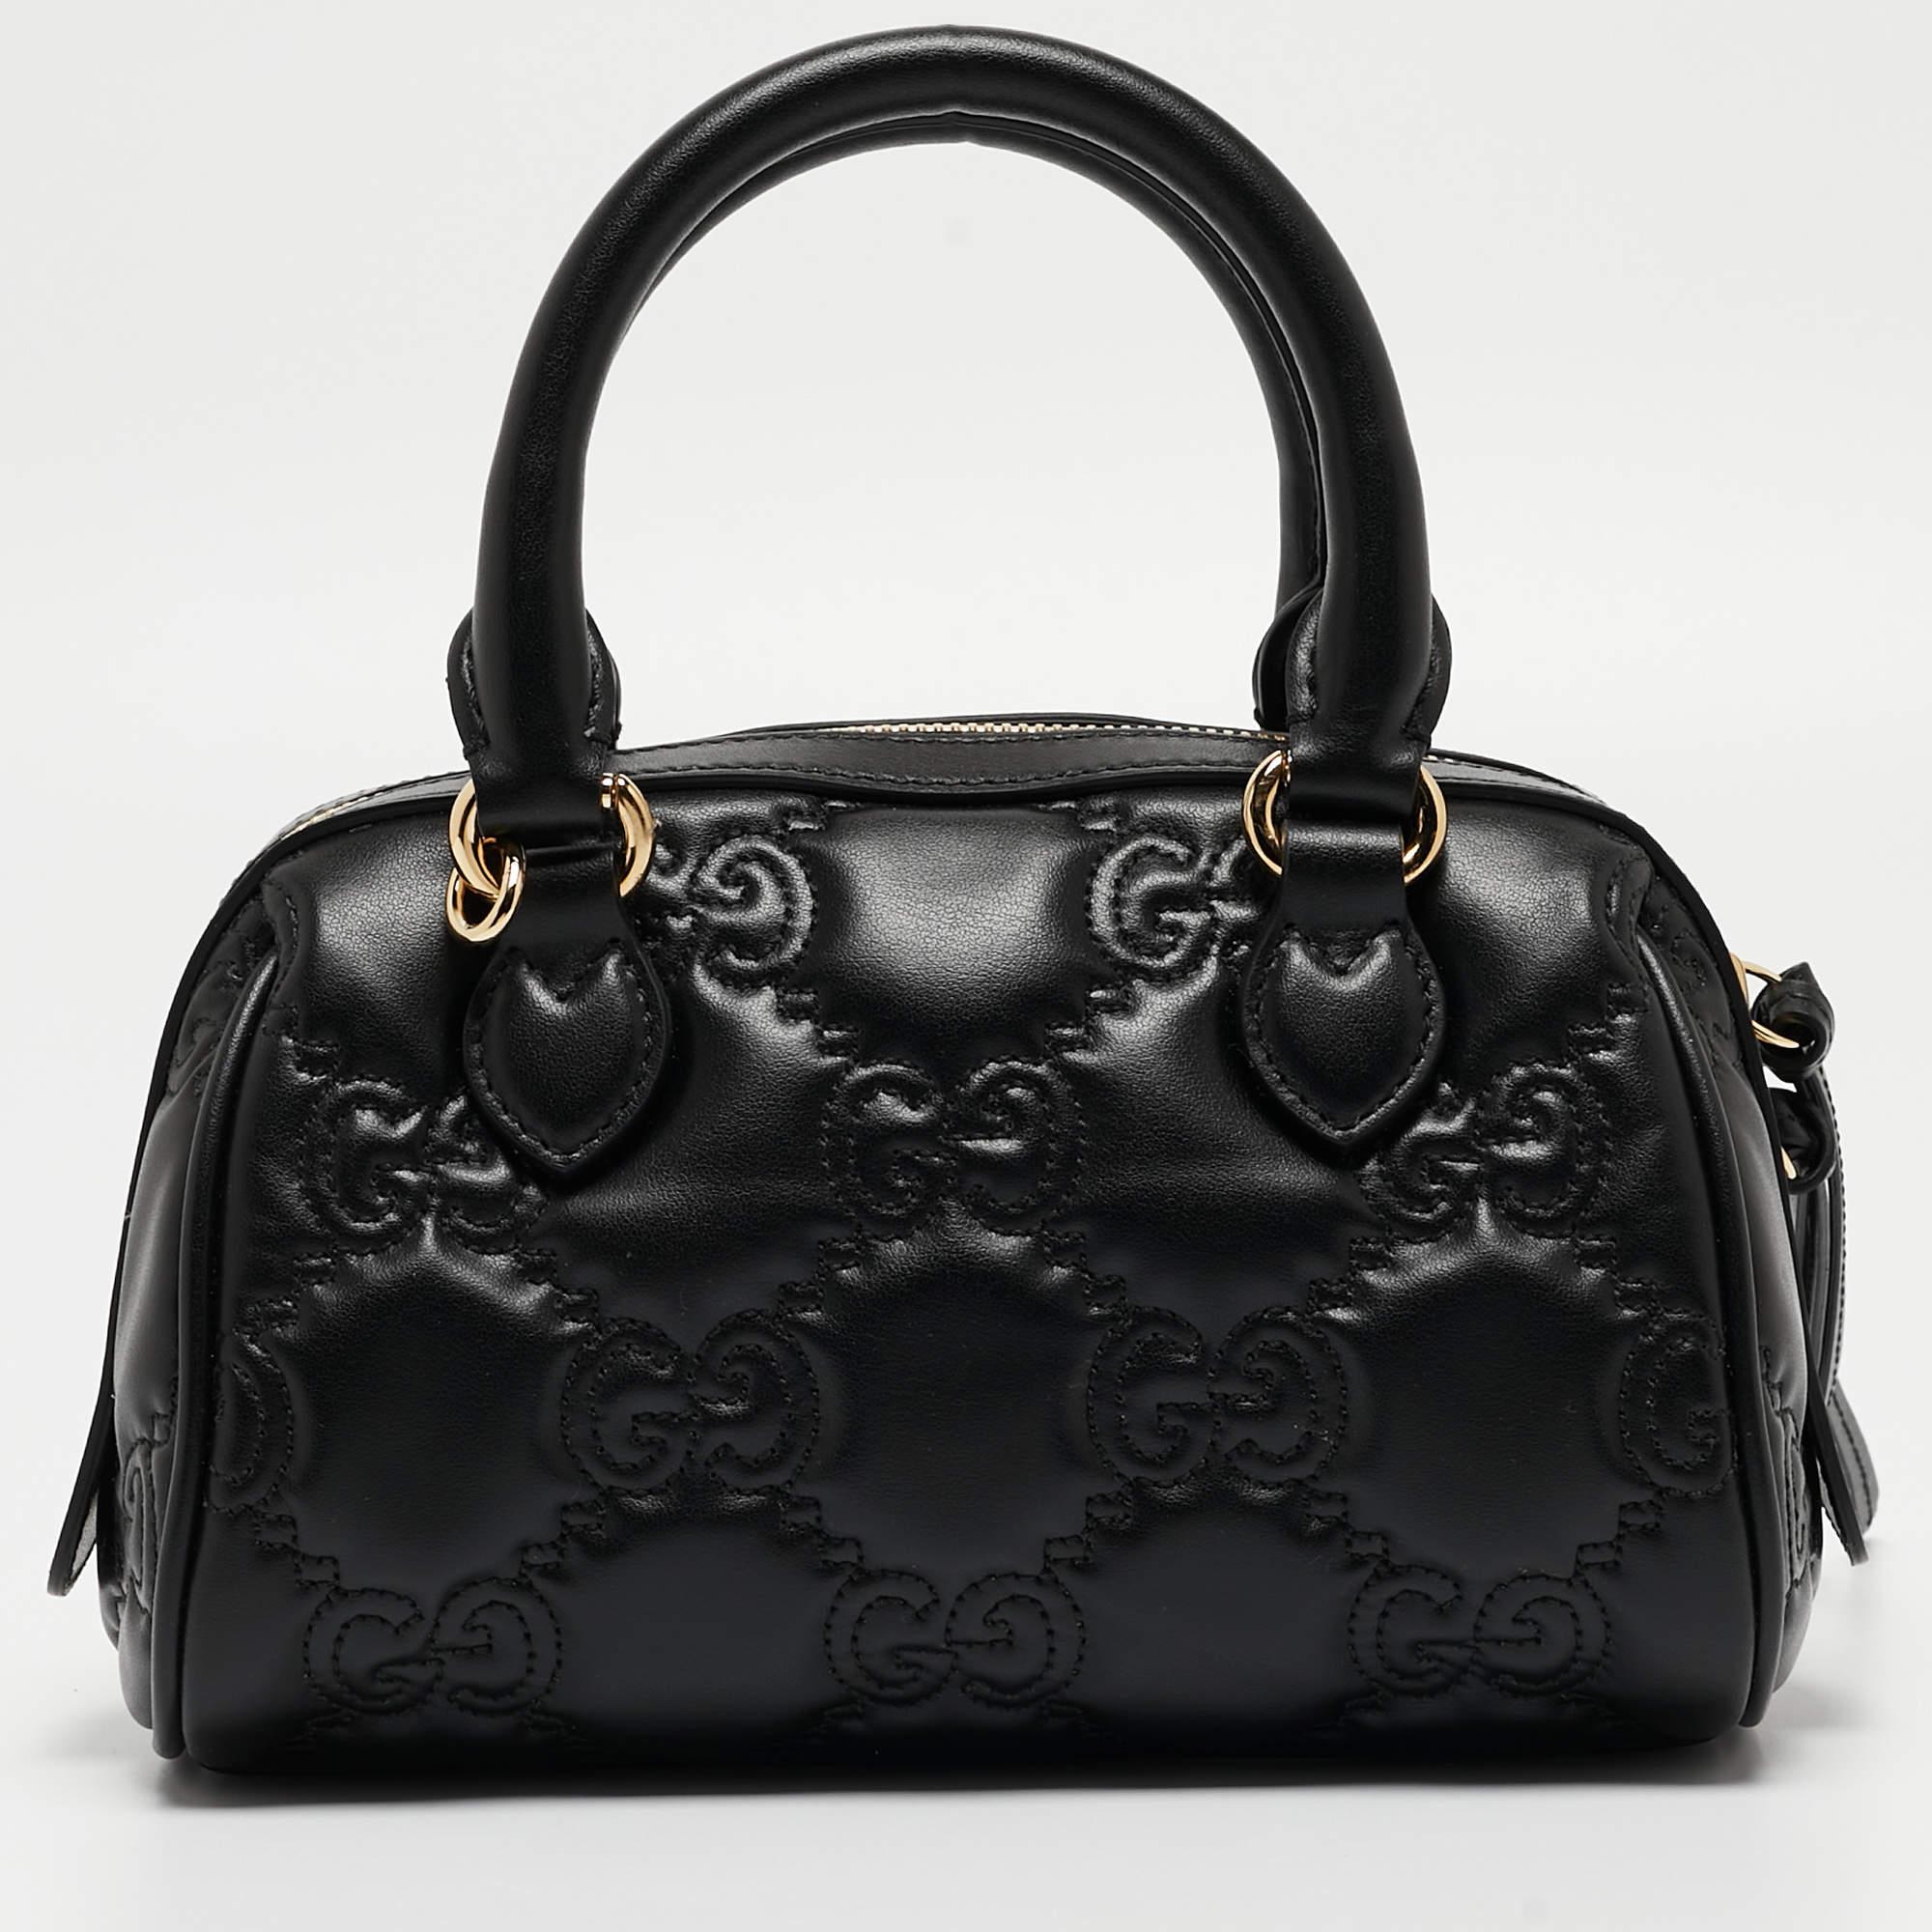 The Gucci bag exudes luxury with its quilted design and iconic GG monogram. Crafted from smooth leather, it features a compact size, gold-tone hardware, top handles, and a chain strap. The matelassé stitching adds texture, making it a sophisticated